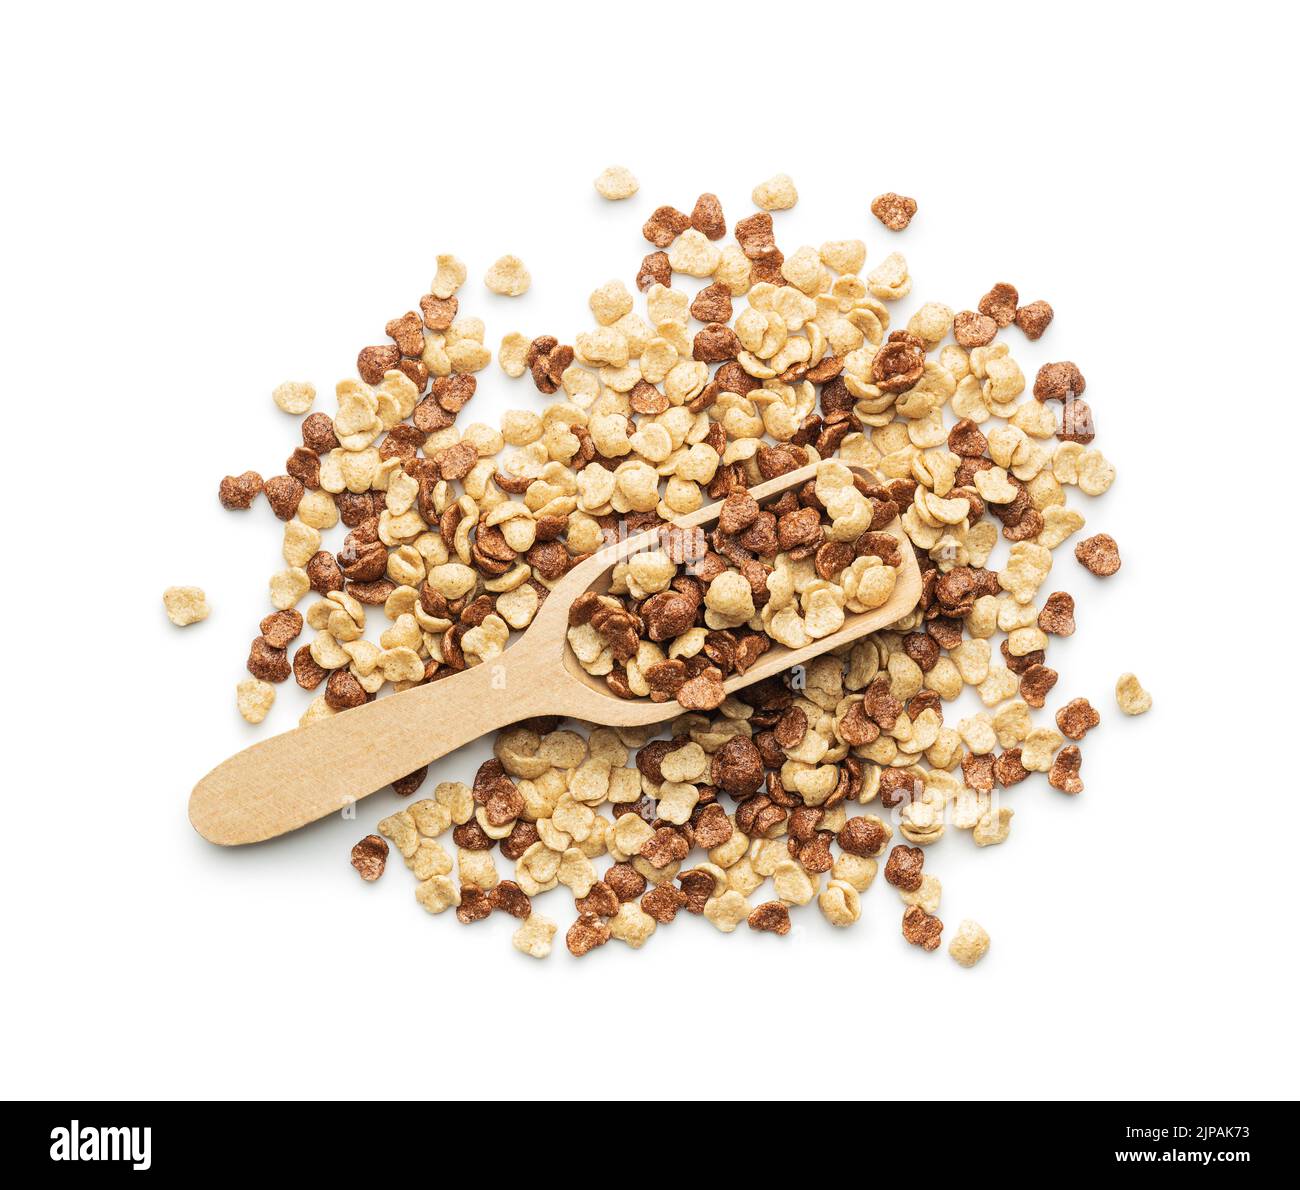 Breakfast cereal flakes in scoop isolated on a white background. Stock Photo